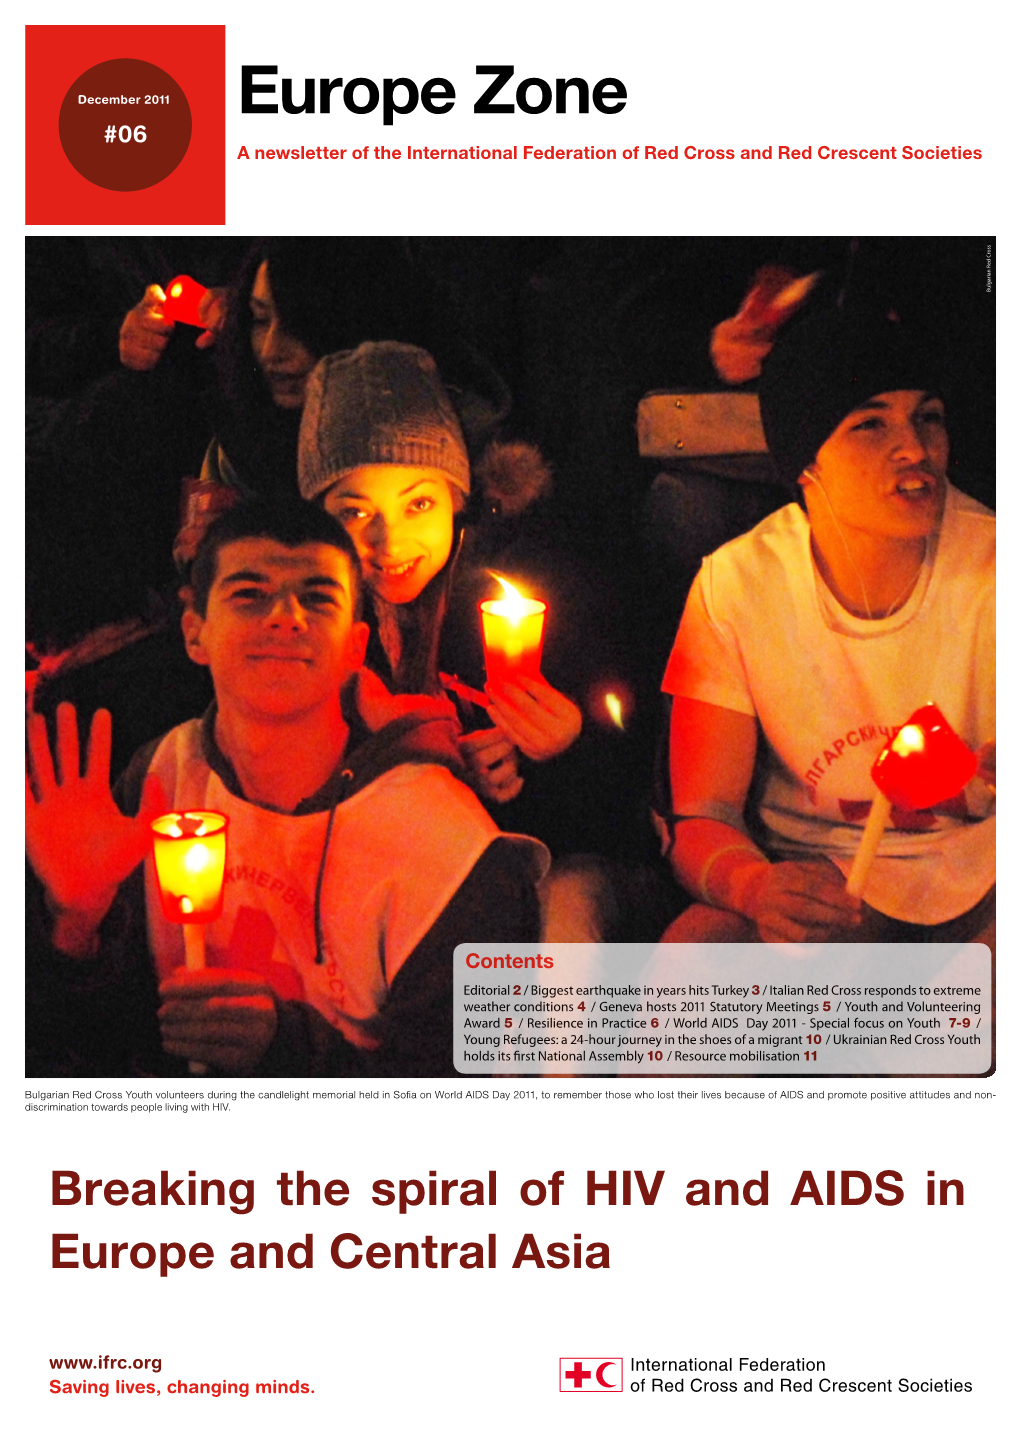 Europe Zone / December 2011 #06/ Breaking the Spiral of HIV and AIDS in Europe and Central Asia Editorial